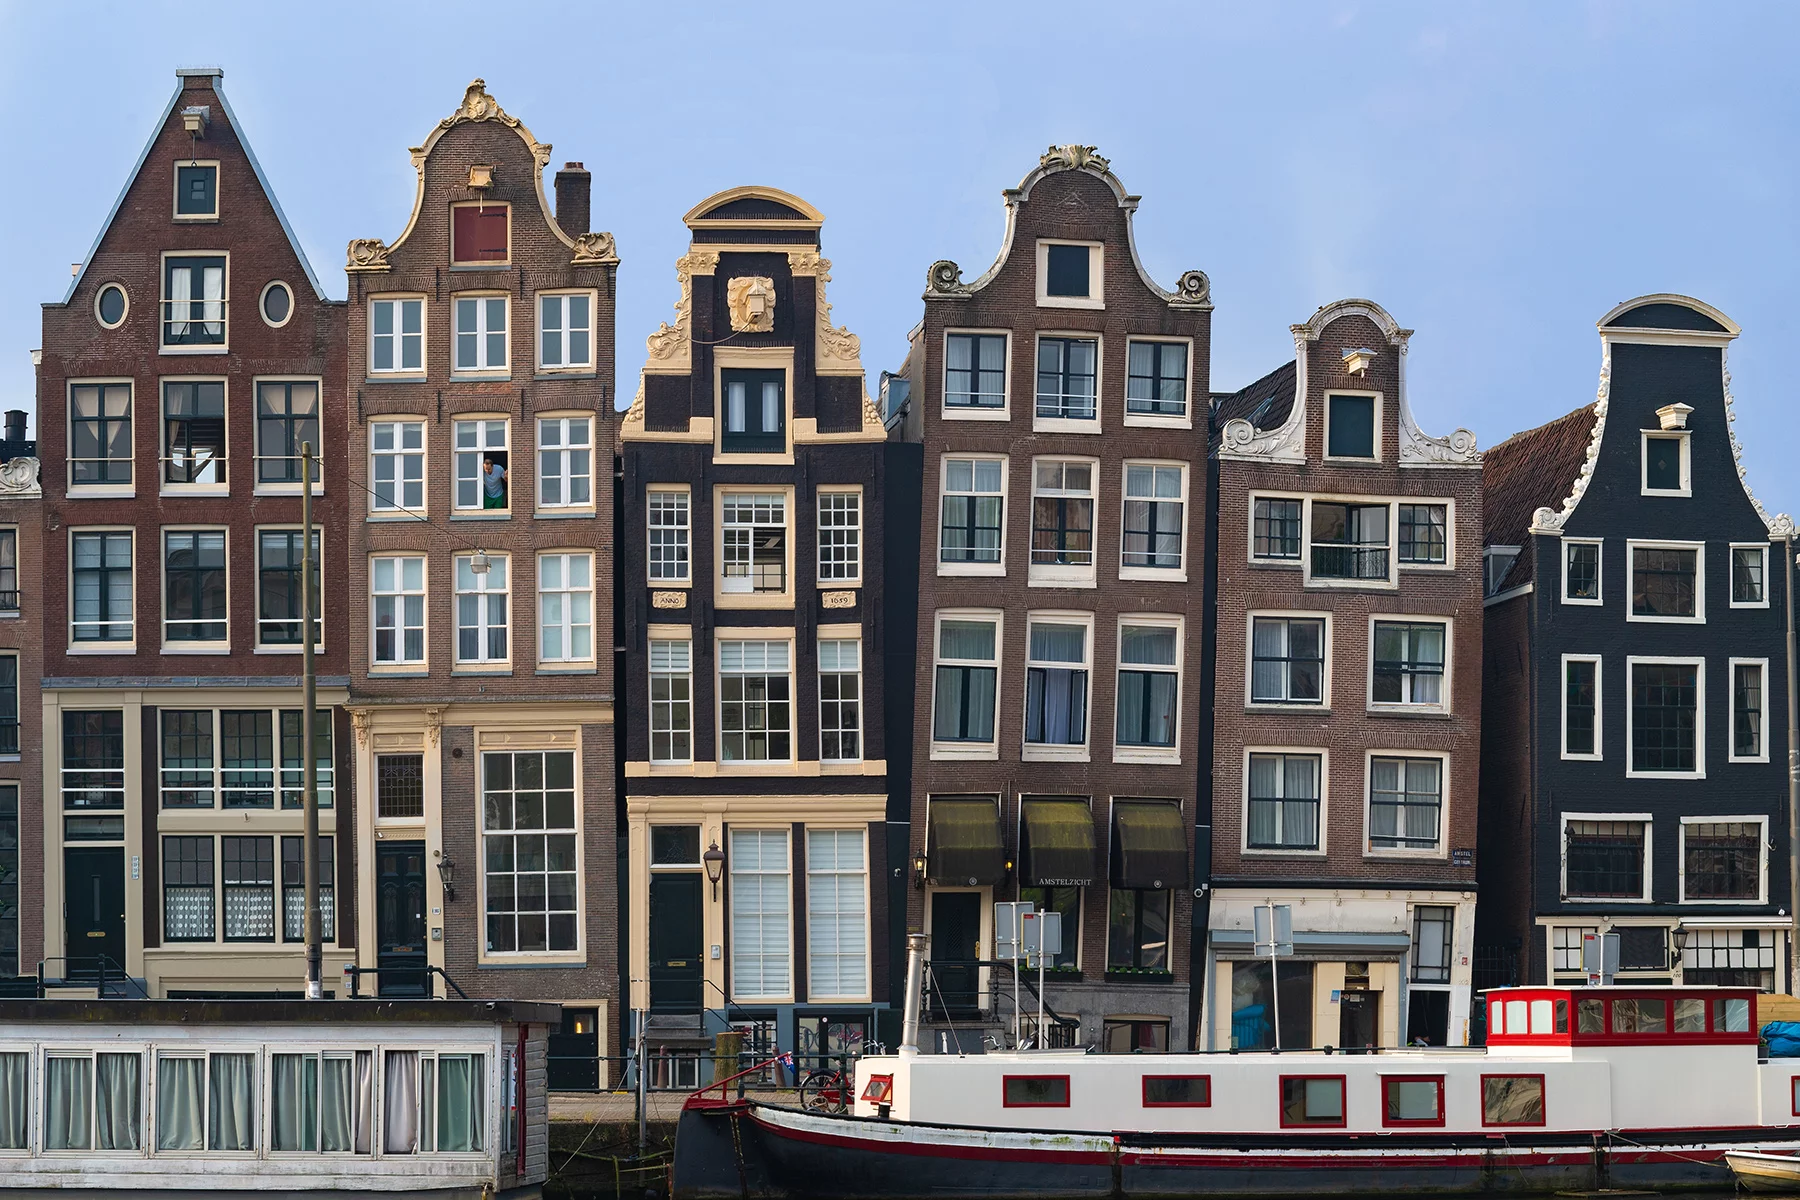 Leaning houses in Amsterdam